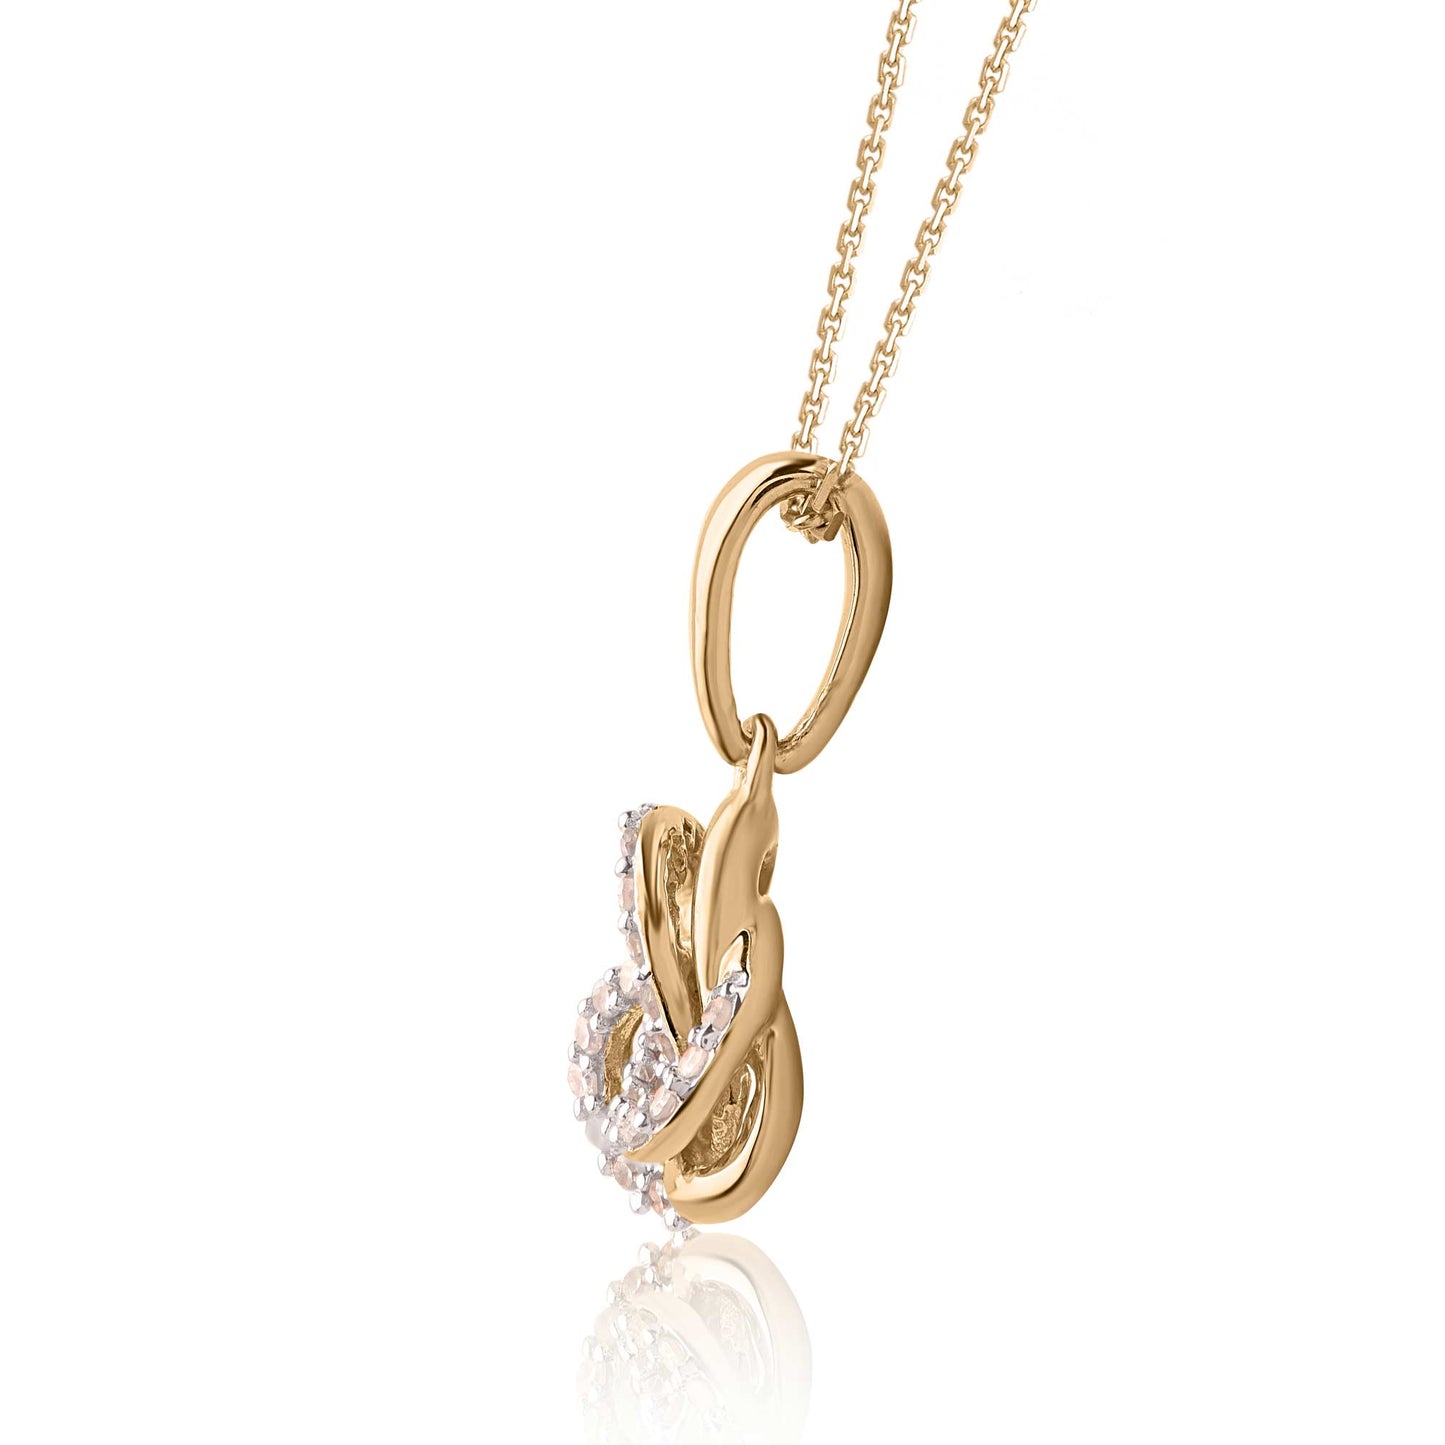 Intertwined Infinity Triangle Pendant Necklace in Gold plated 925 Sterling Silver